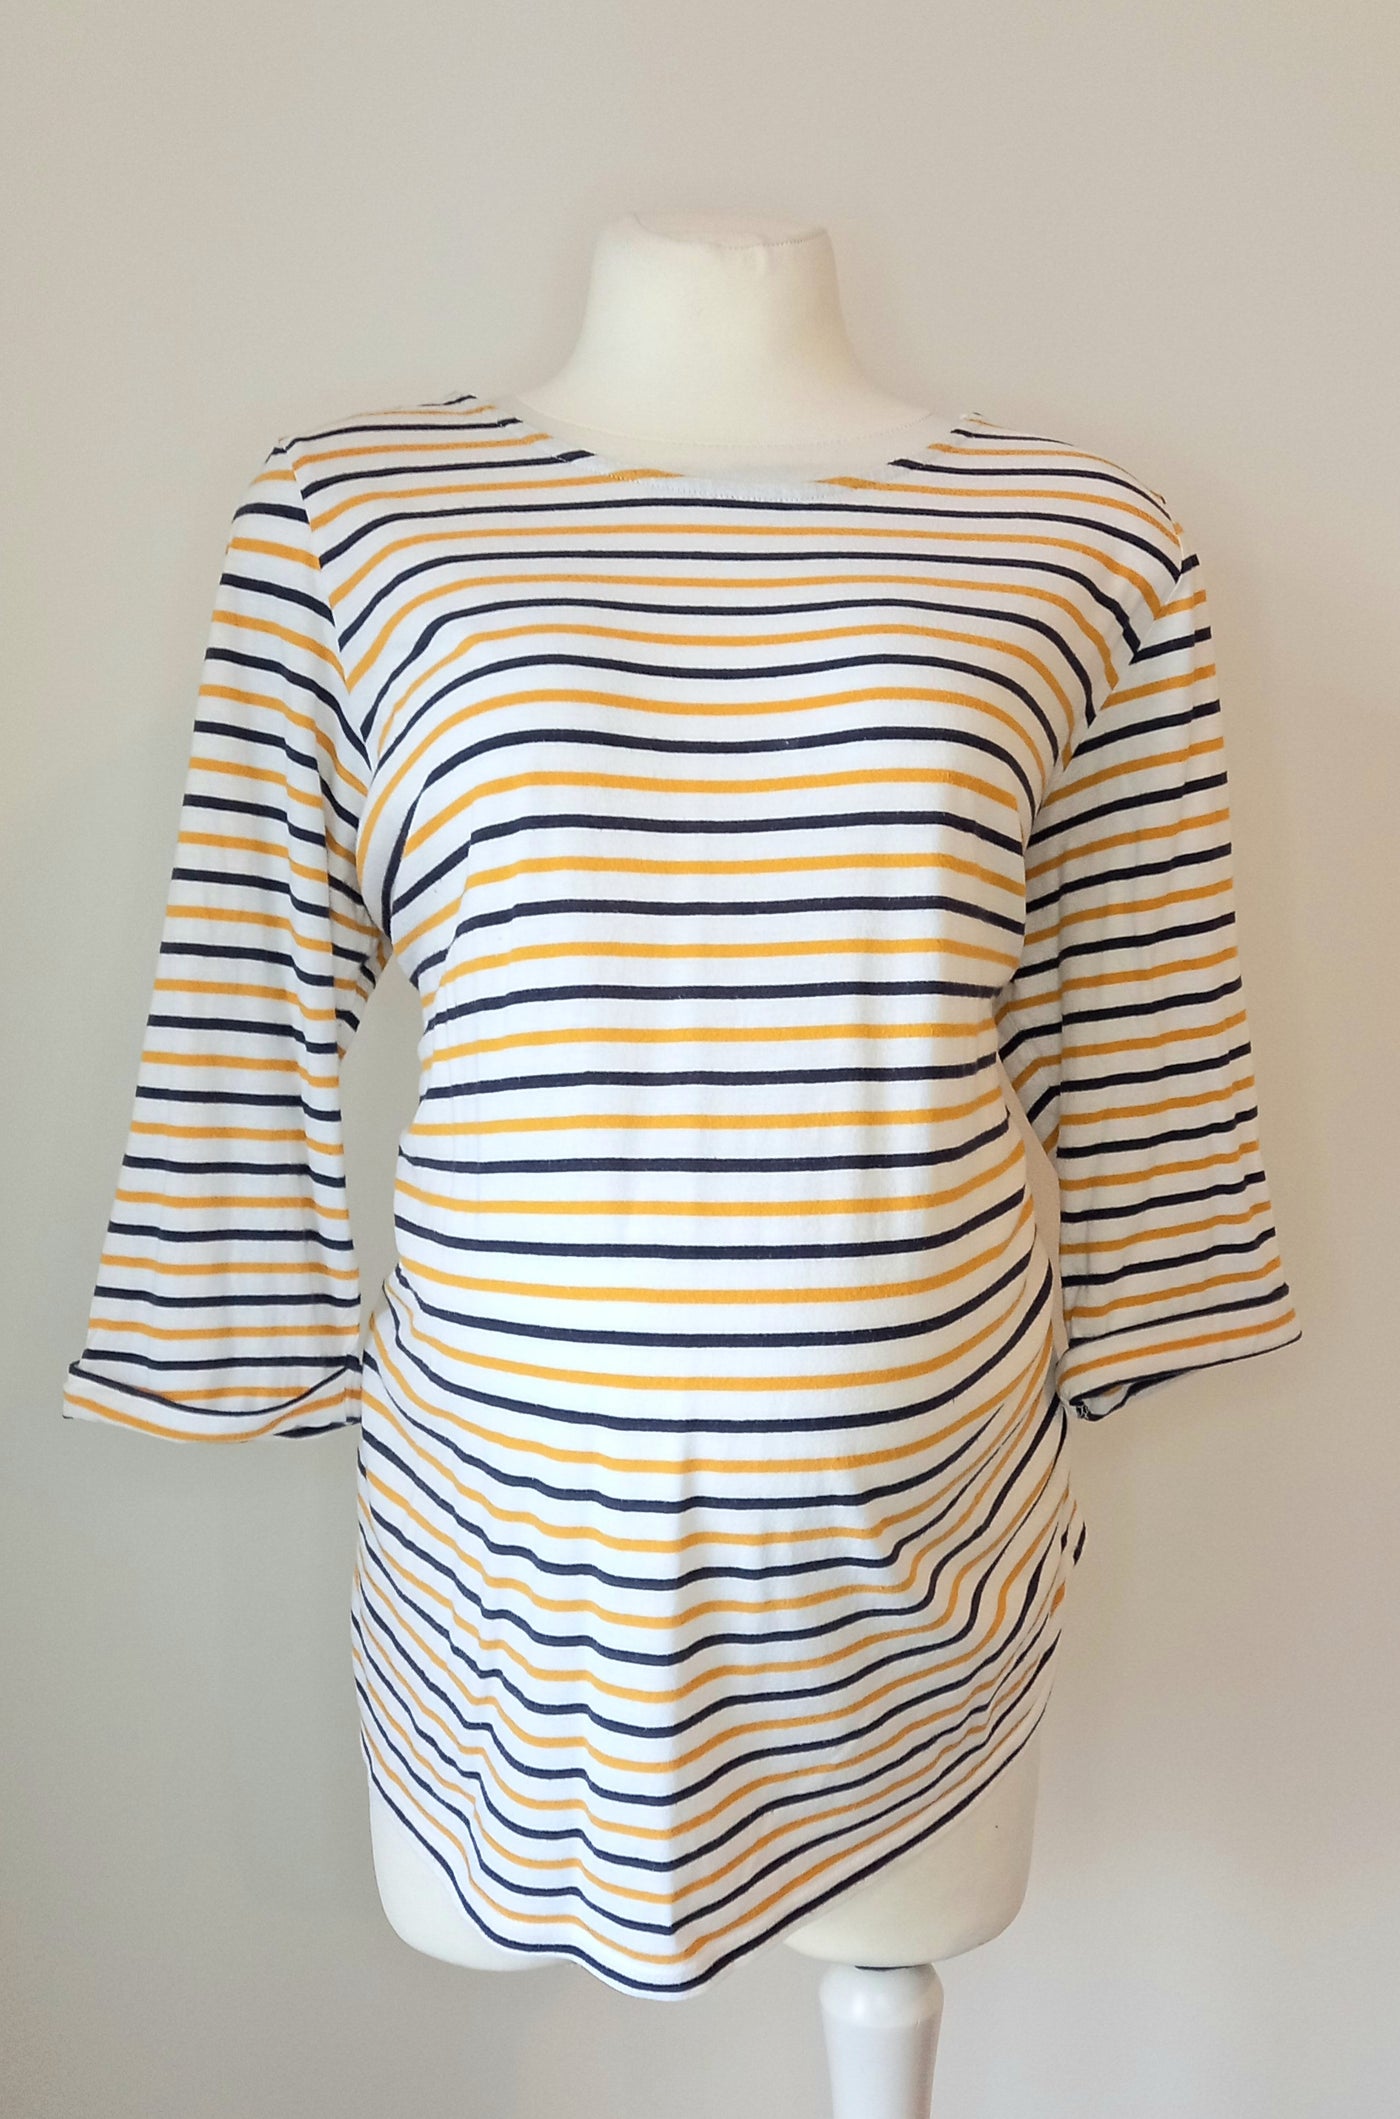 New Look Maternity Navy, Mustard & White Striped Top - Size 18